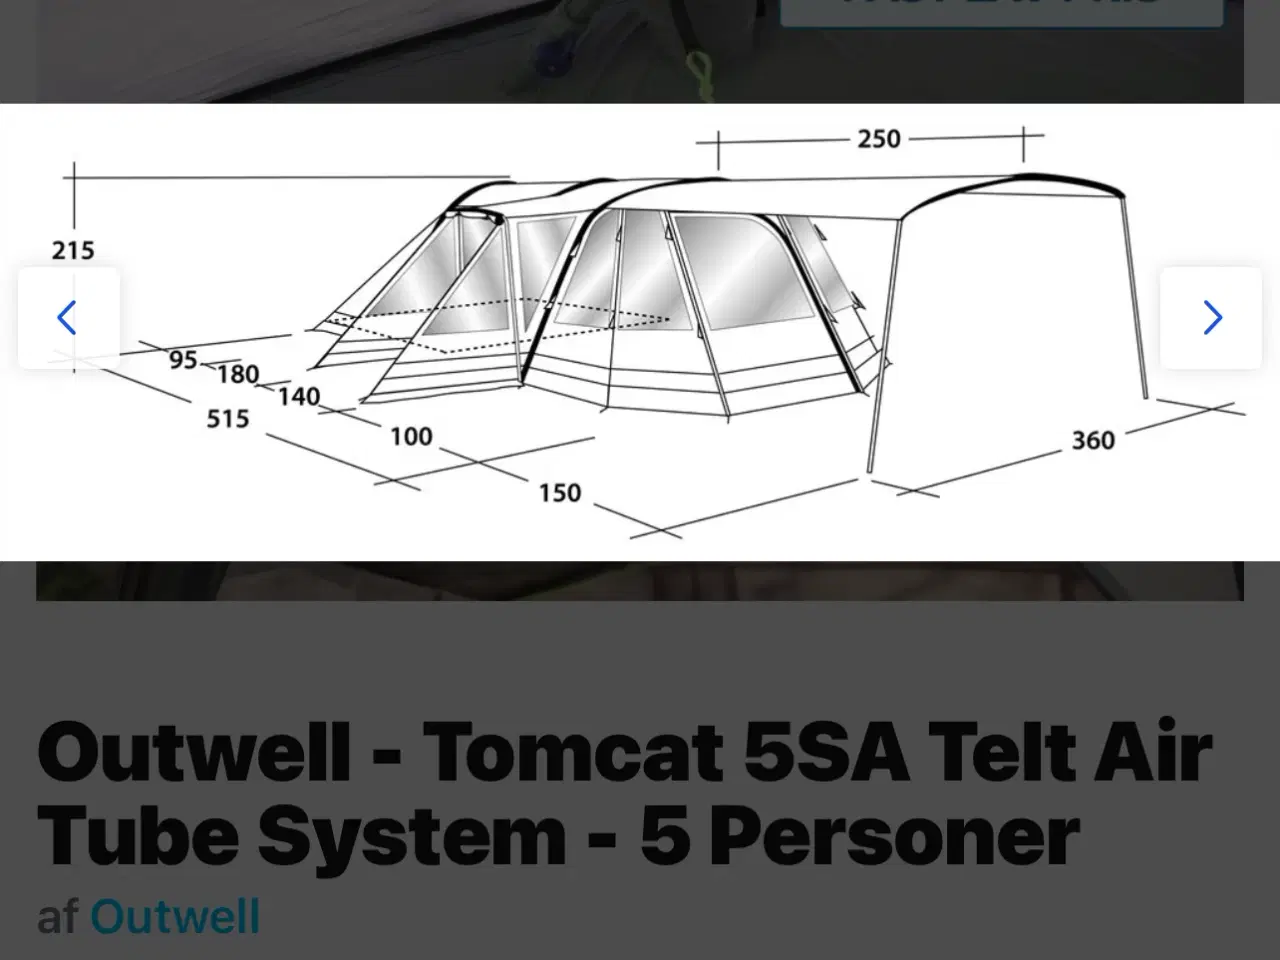 Billede 3 - Outwell - Tomcat 5SA Telt Air Tube System - 5 Pers